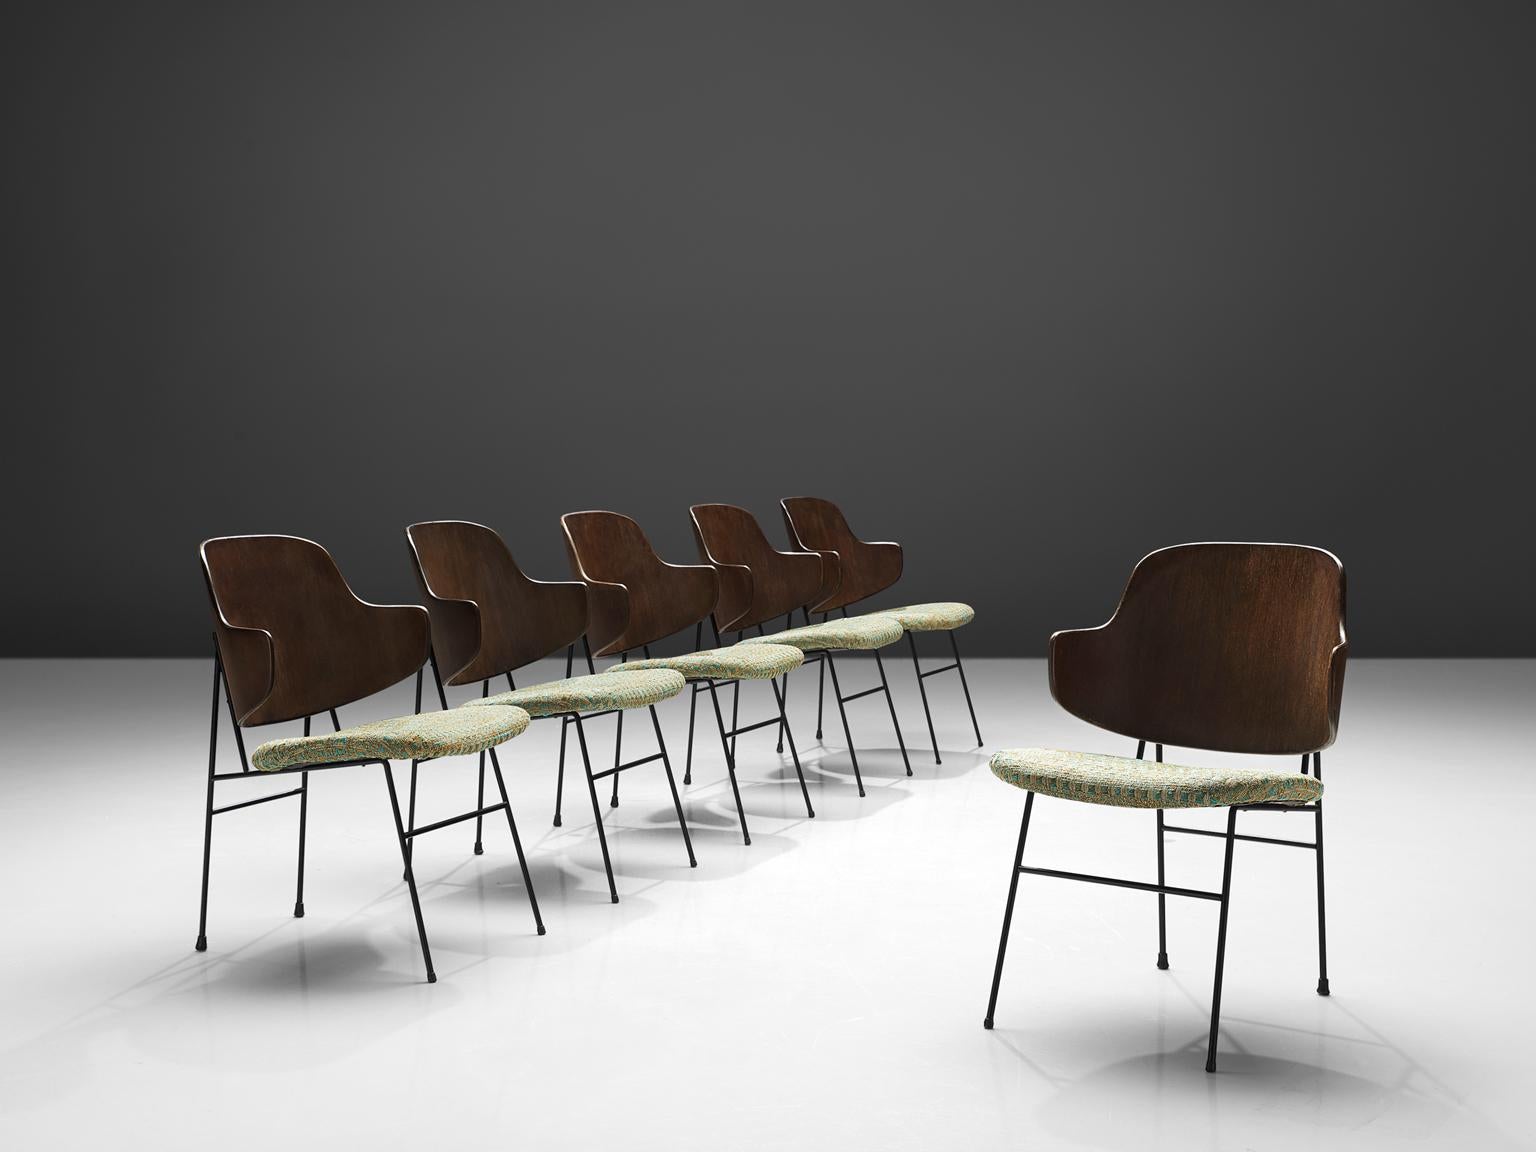 Ib Kofod-Larsen, six 'Penguin' chairs, walnut, steel, metal, Denmark, design 1953, production 1960s.

This is a set of six 'Penguin' chairs by Ib Kofod-Larsen, but they come from a set of 36 that is available in total. The chair was first taken